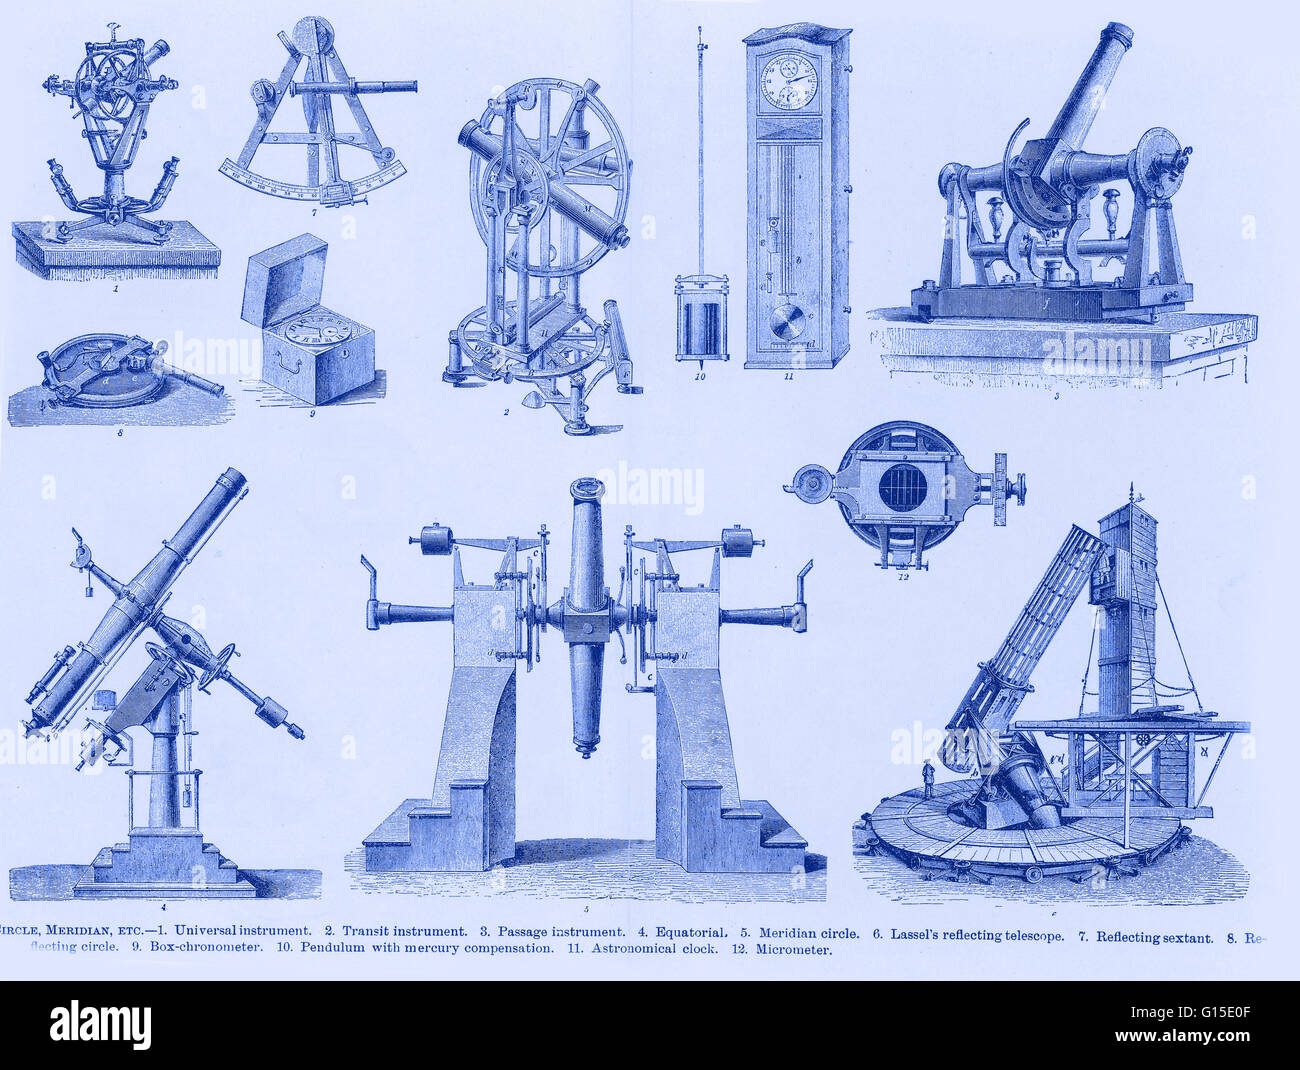 Engraving of historical astronomy instruments. Stock Photo